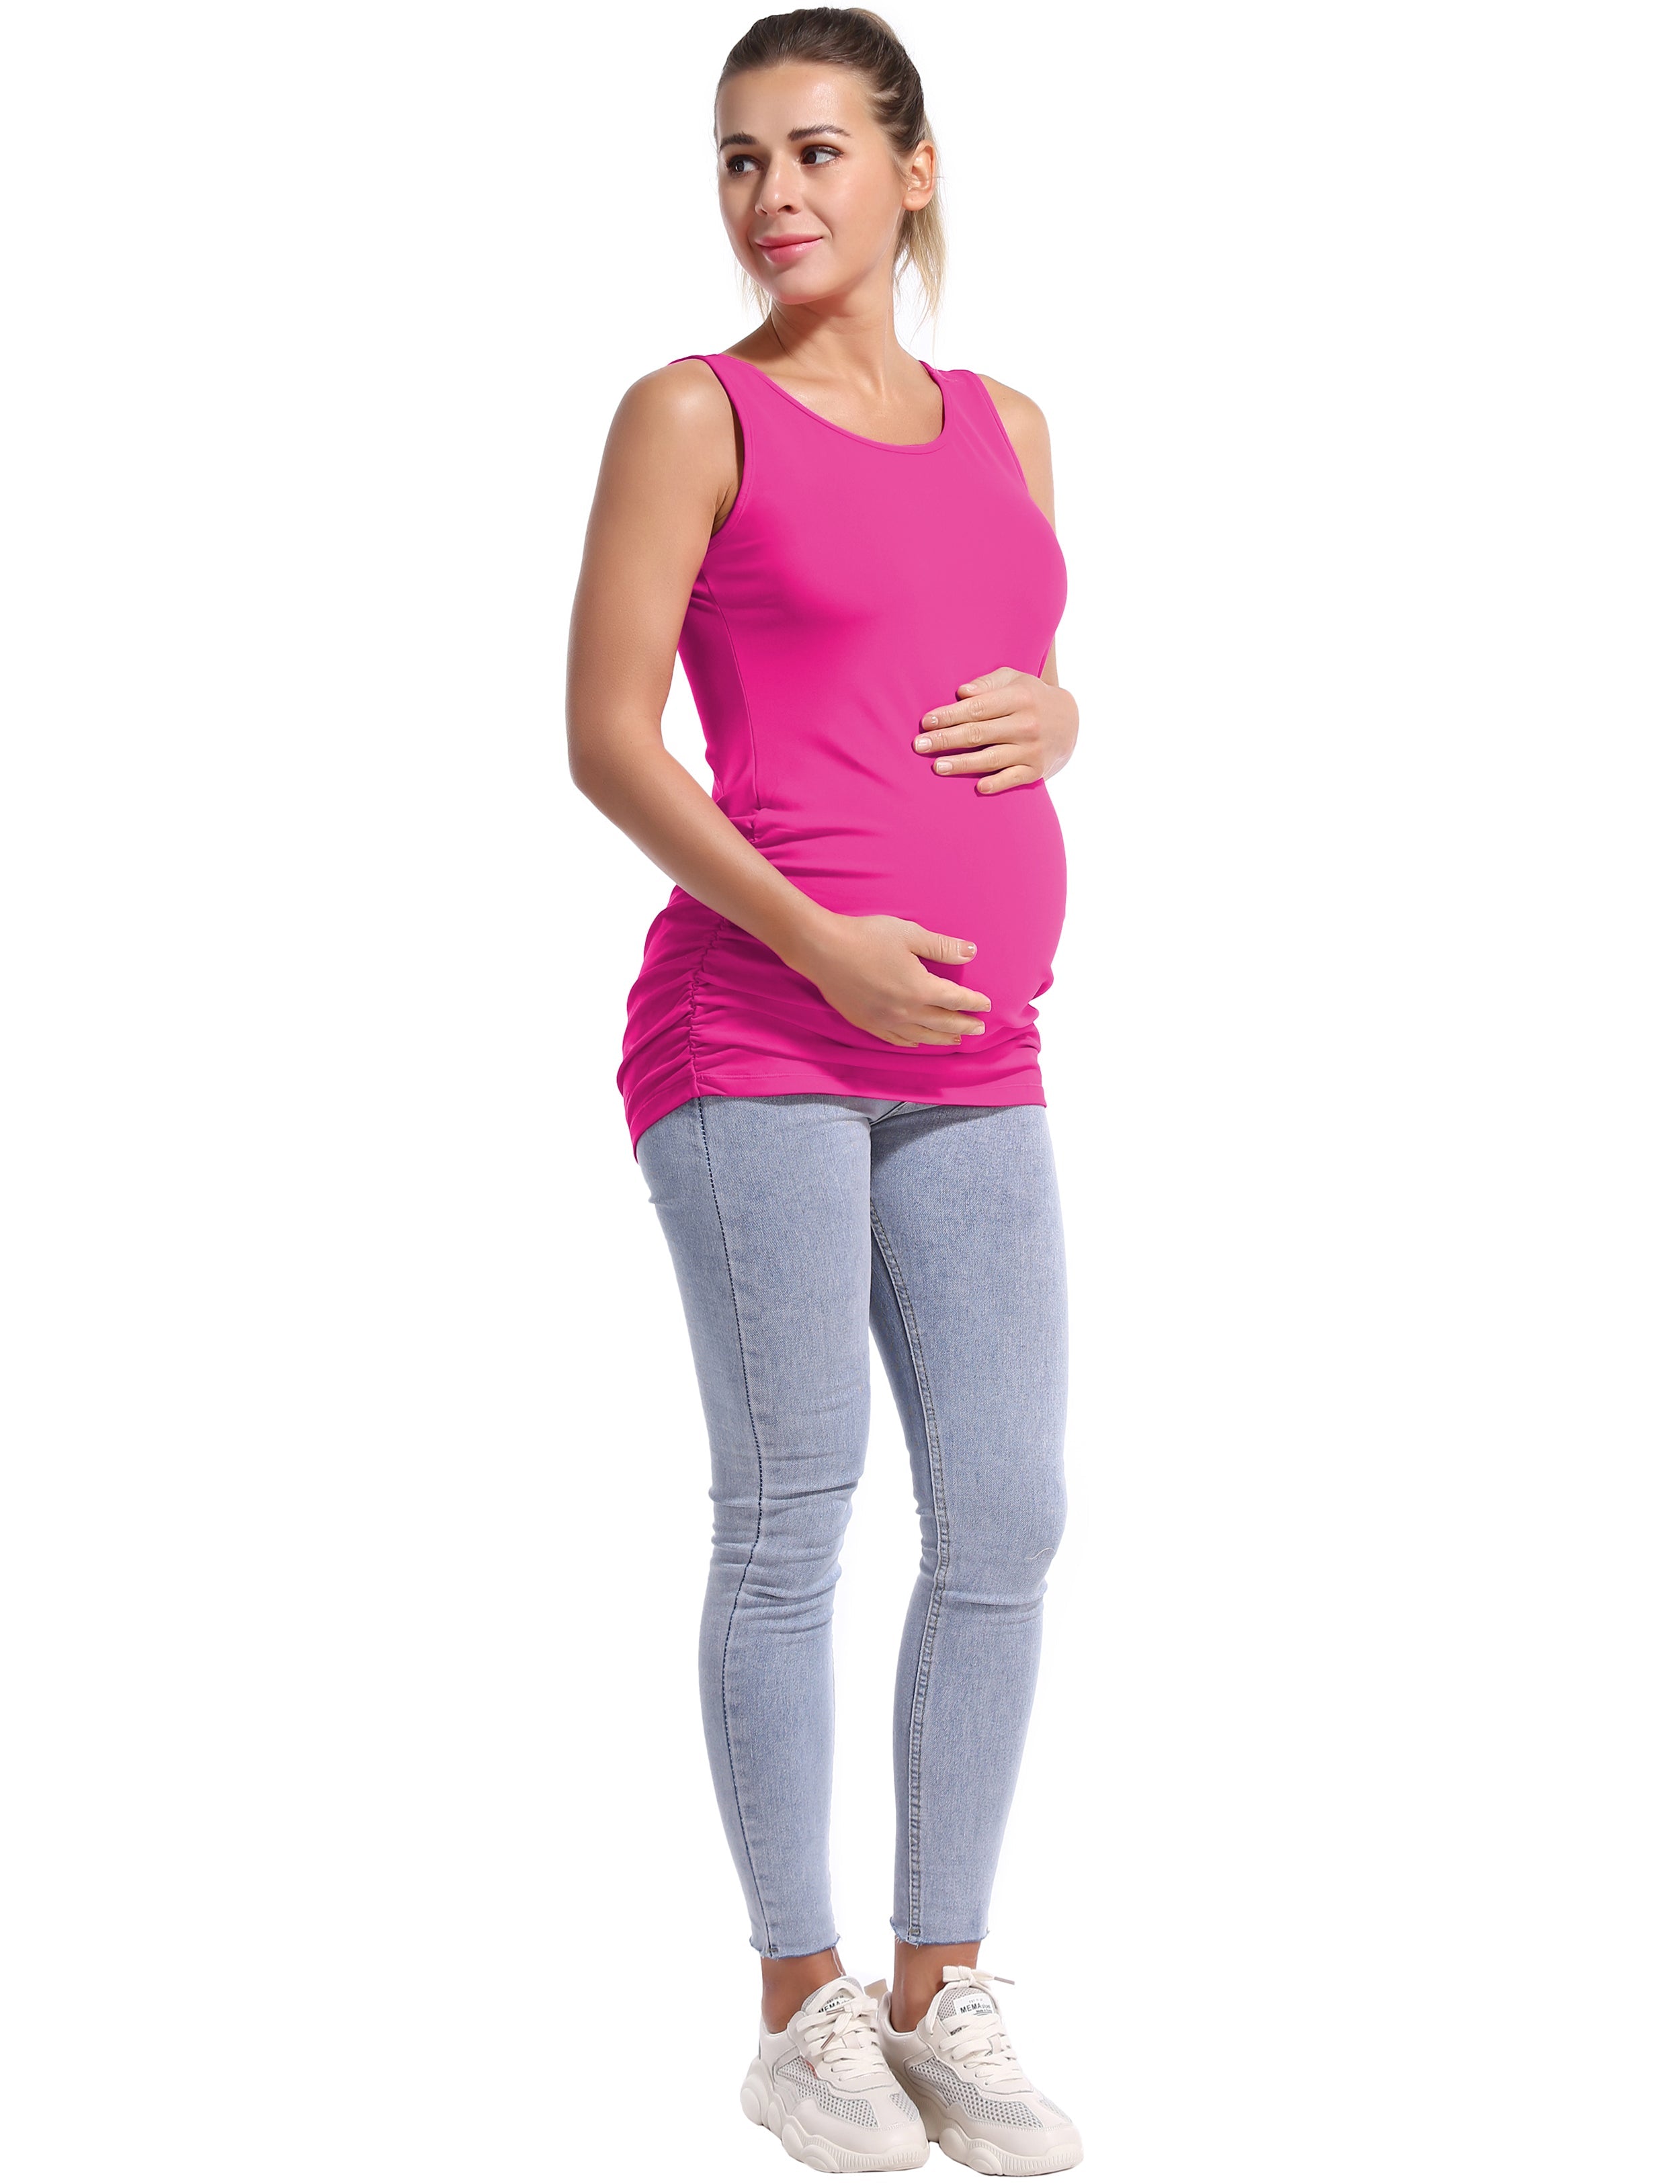 Maternity Side Shirred Tank Top magenta 92%Nylon/8%Spandex(Cotton Soft) Designed for Maternity So buttery soft, it feels weightless Sweat-wicking Four-way stretch Breathable Contours your body